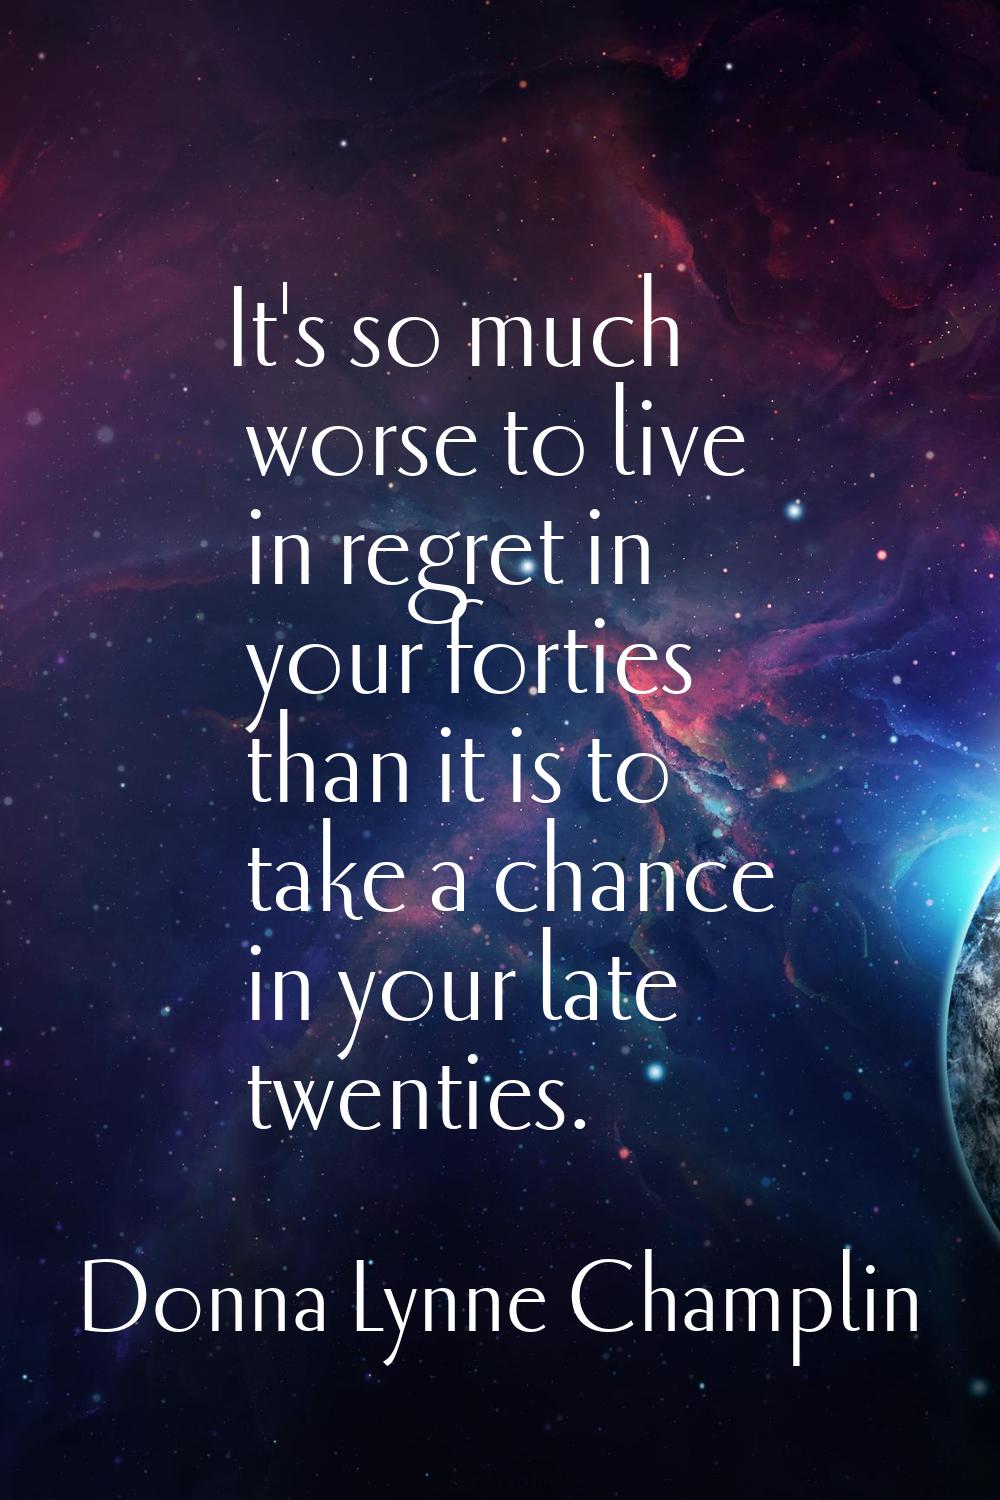 It's so much worse to live in regret in your forties than it is to take a chance in your late twent